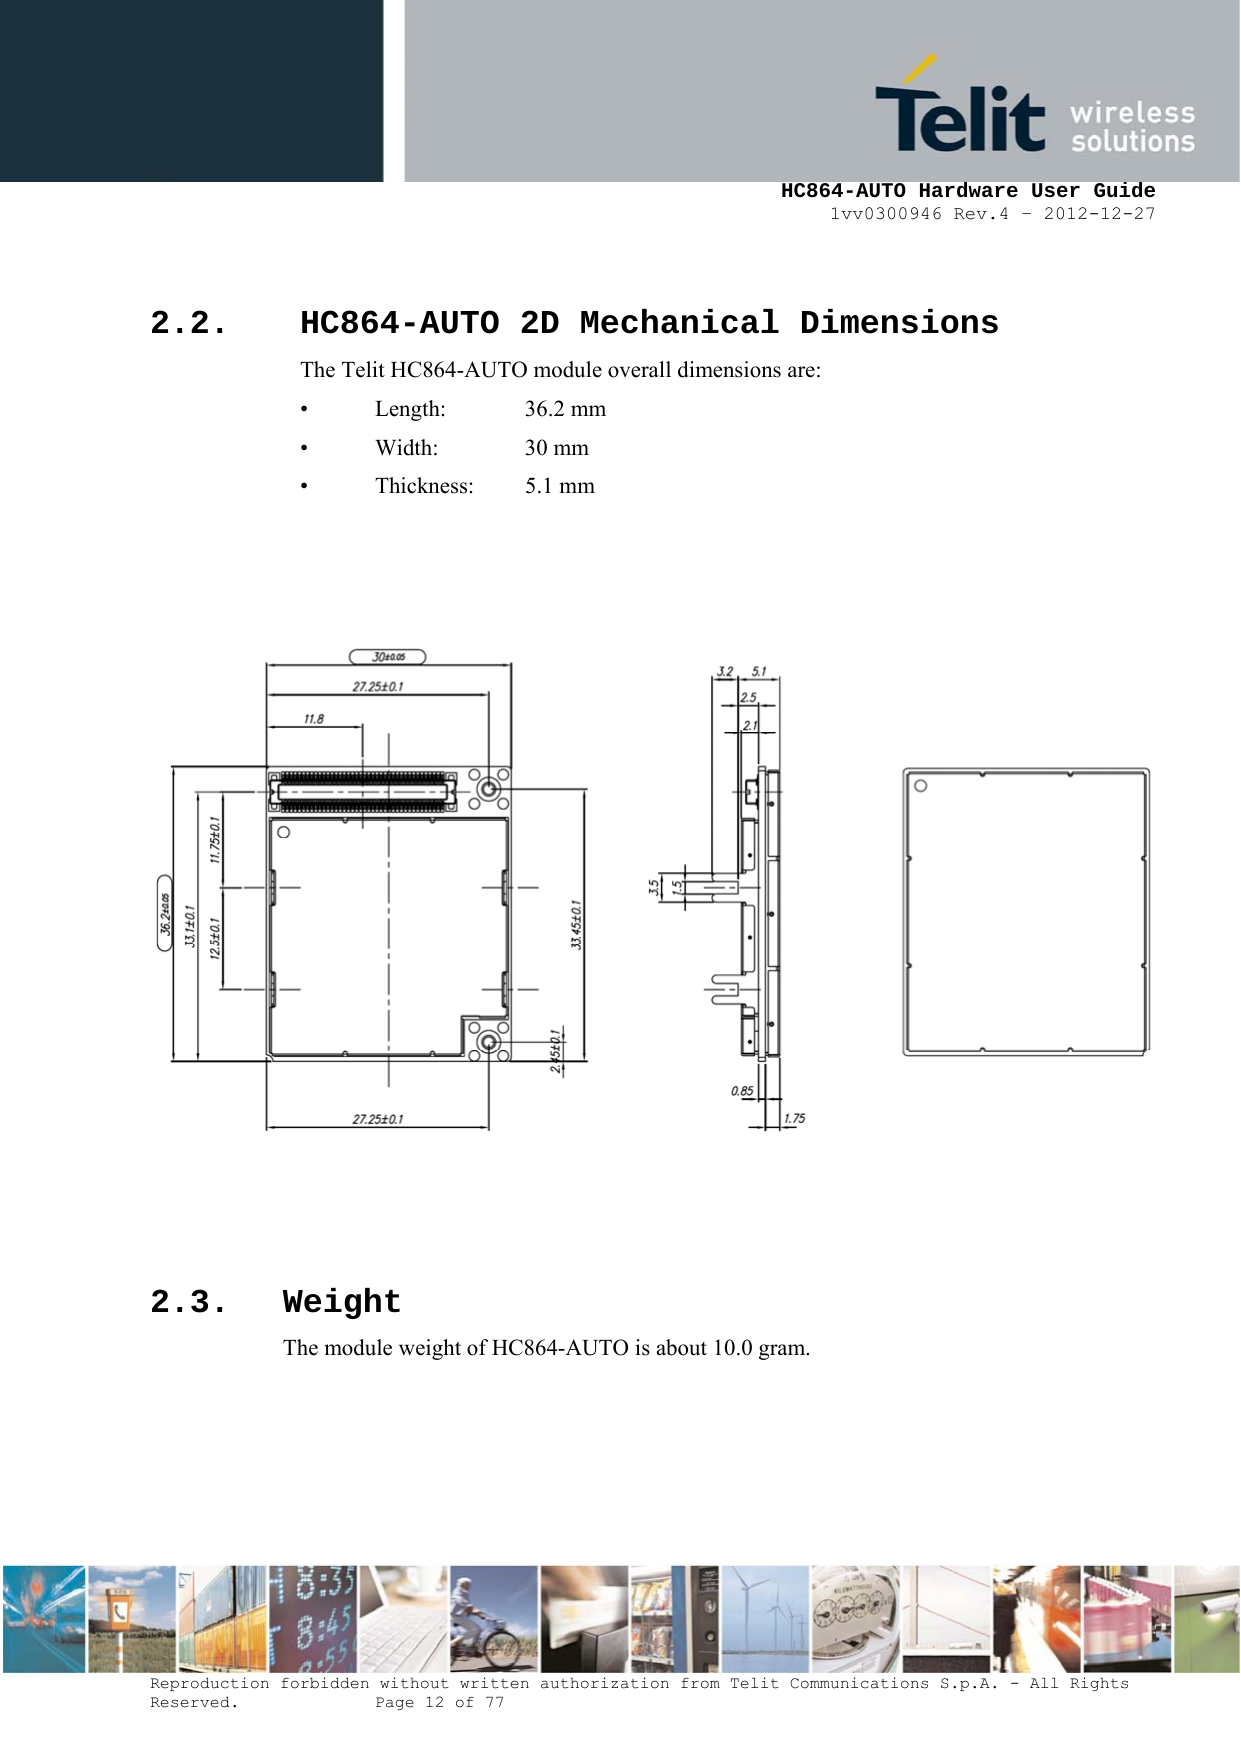     HC864-AUTO Hardware User Guide 1vv0300946 Rev.4 – 2012-12-27 Reproduction forbidden without written authorization from Telit Communications S.p.A. - All Rights Reserved.    Page 12 of 77   2.2. HC864-AUTO 2D Mechanical Dimensions The Telit HC864-AUTO module overall dimensions are:  • Length:   36.2 mm •  Width:    30 mm •  Thickness:   5.1 mm       2.3. Weight The module weight of HC864-AUTO is about 10.0 gram.  